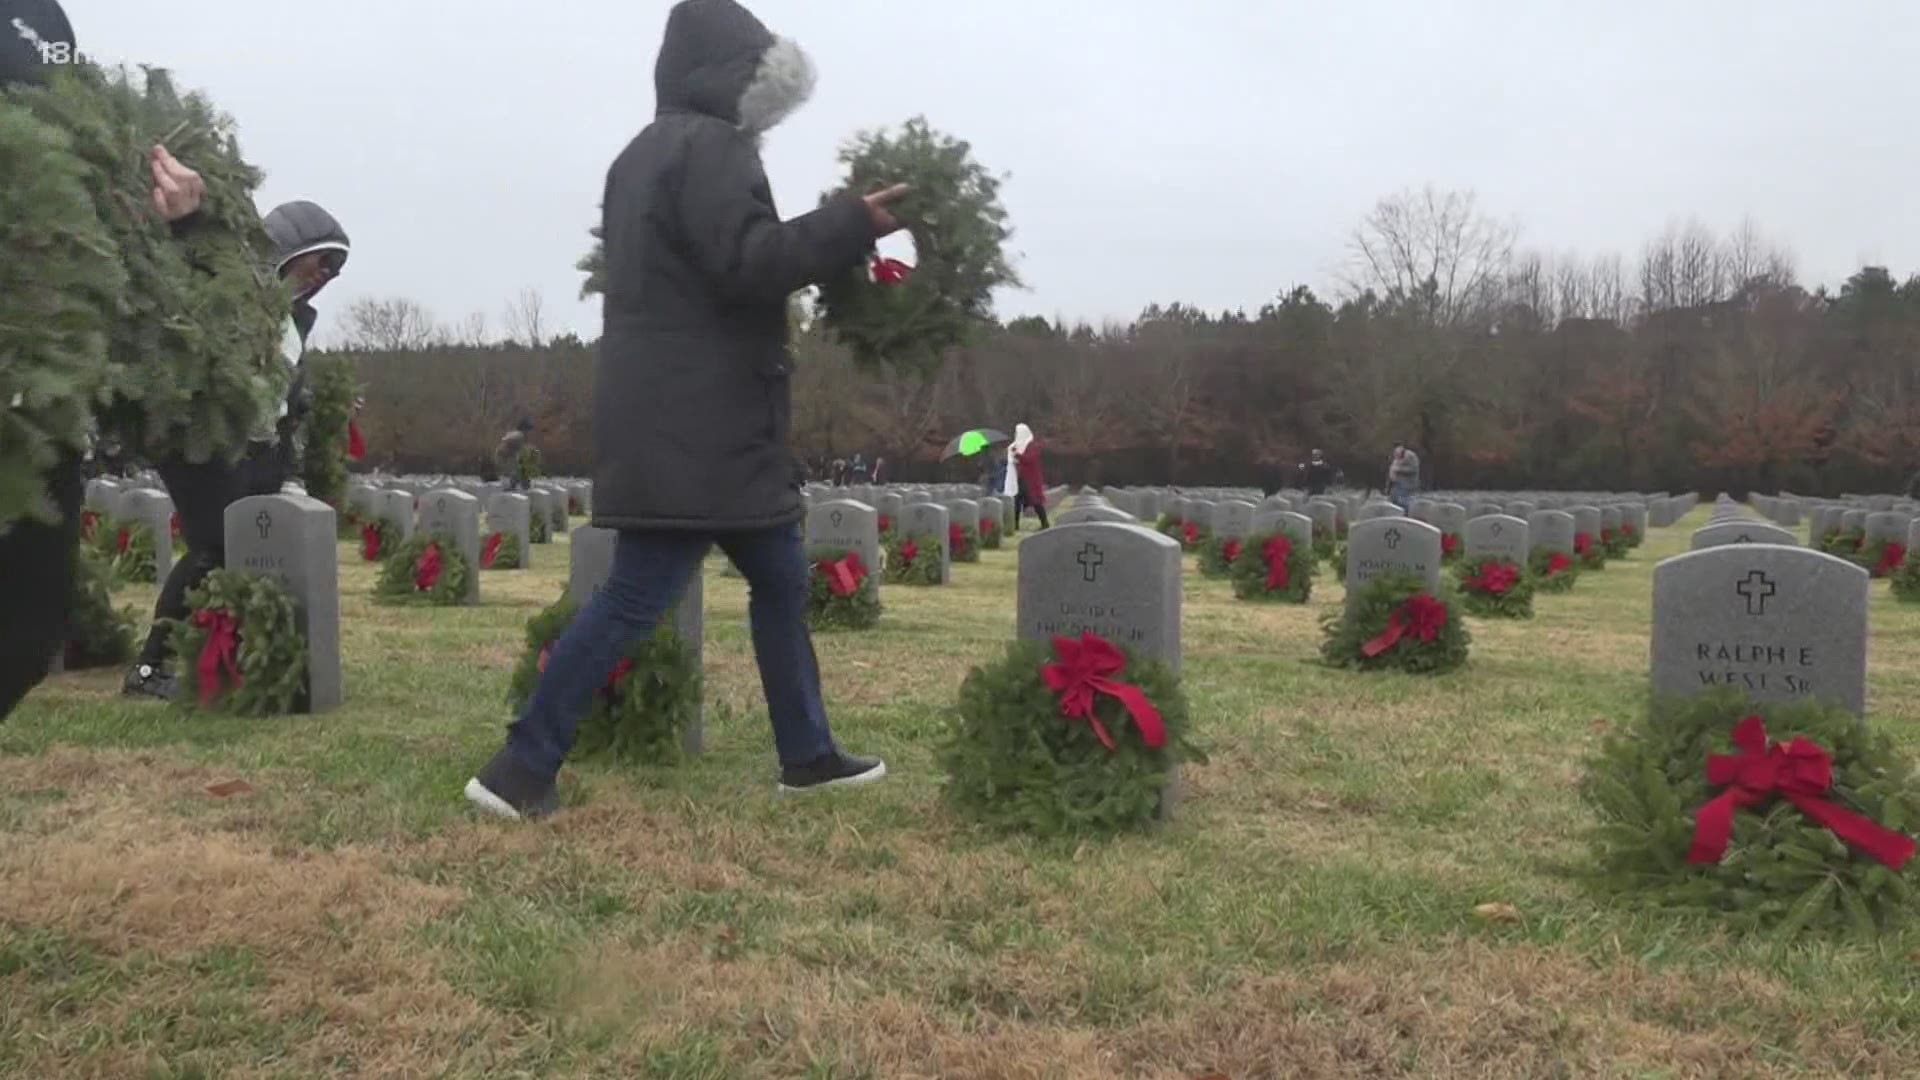 The wreath-laying ceremony done to honor those who served in the armed forces is expected to be much smaller this year due to the COVID-19 pandemic.